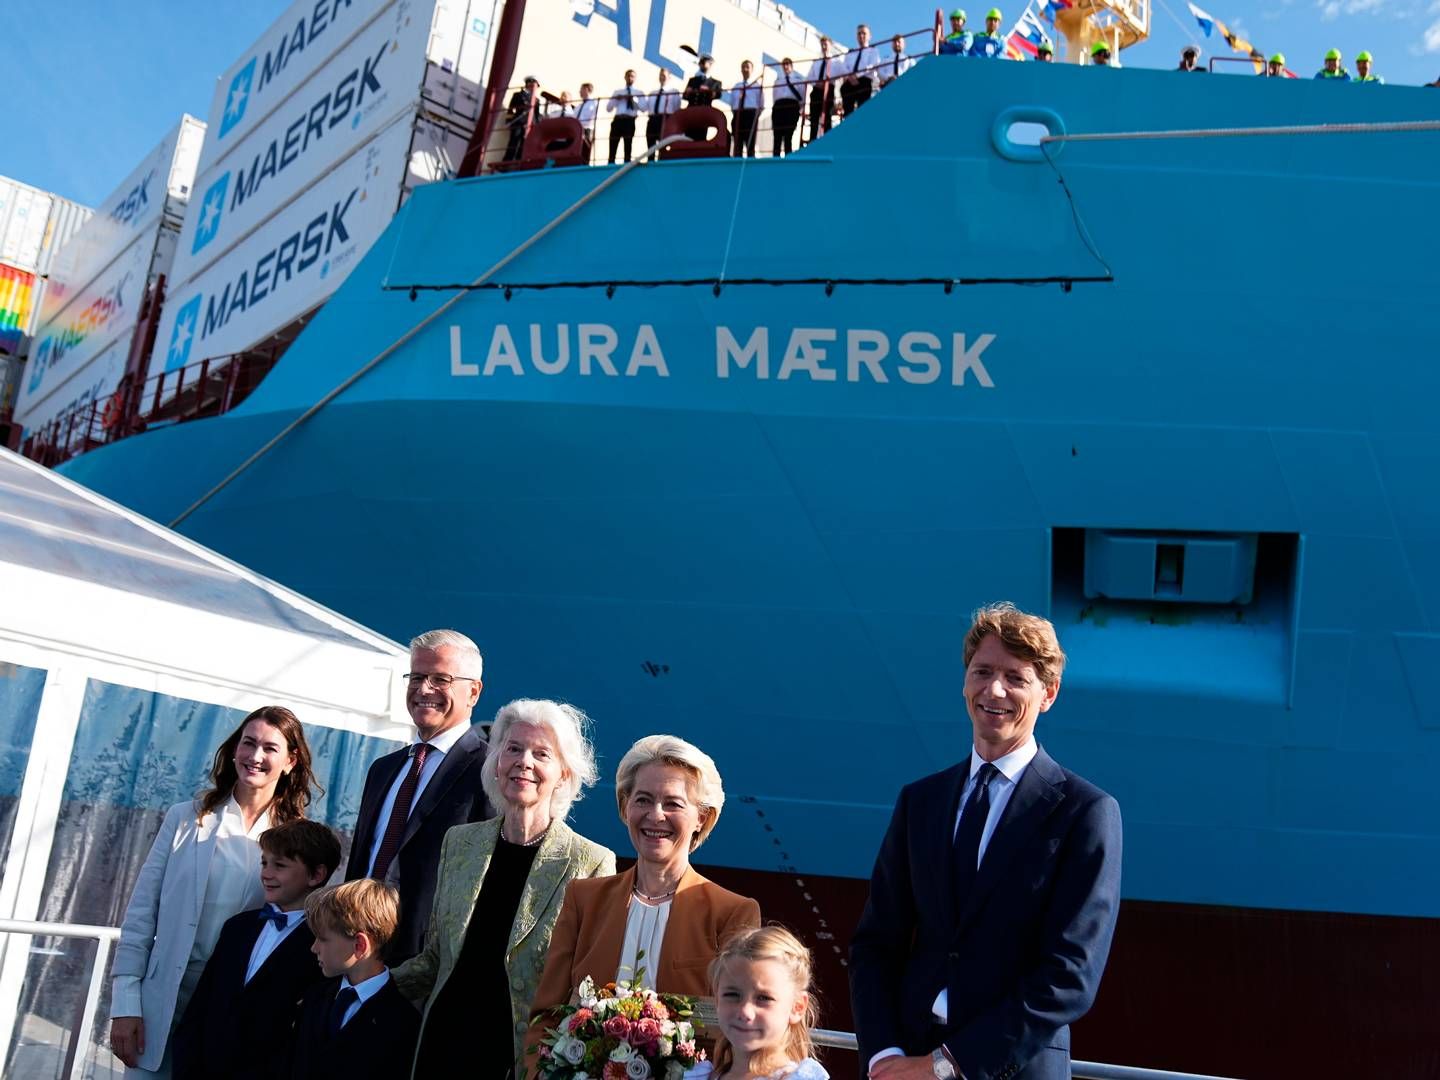 "Laura Maersk", the new container ship that will be the first in the world to run on methanol, was named on Thursday by EU Commission President Ursula von der Leyen. On the right in the photo is Robert Mærsk Uggla. | Photo: Mads Claus Rasmussen/Ritzau Scanpix